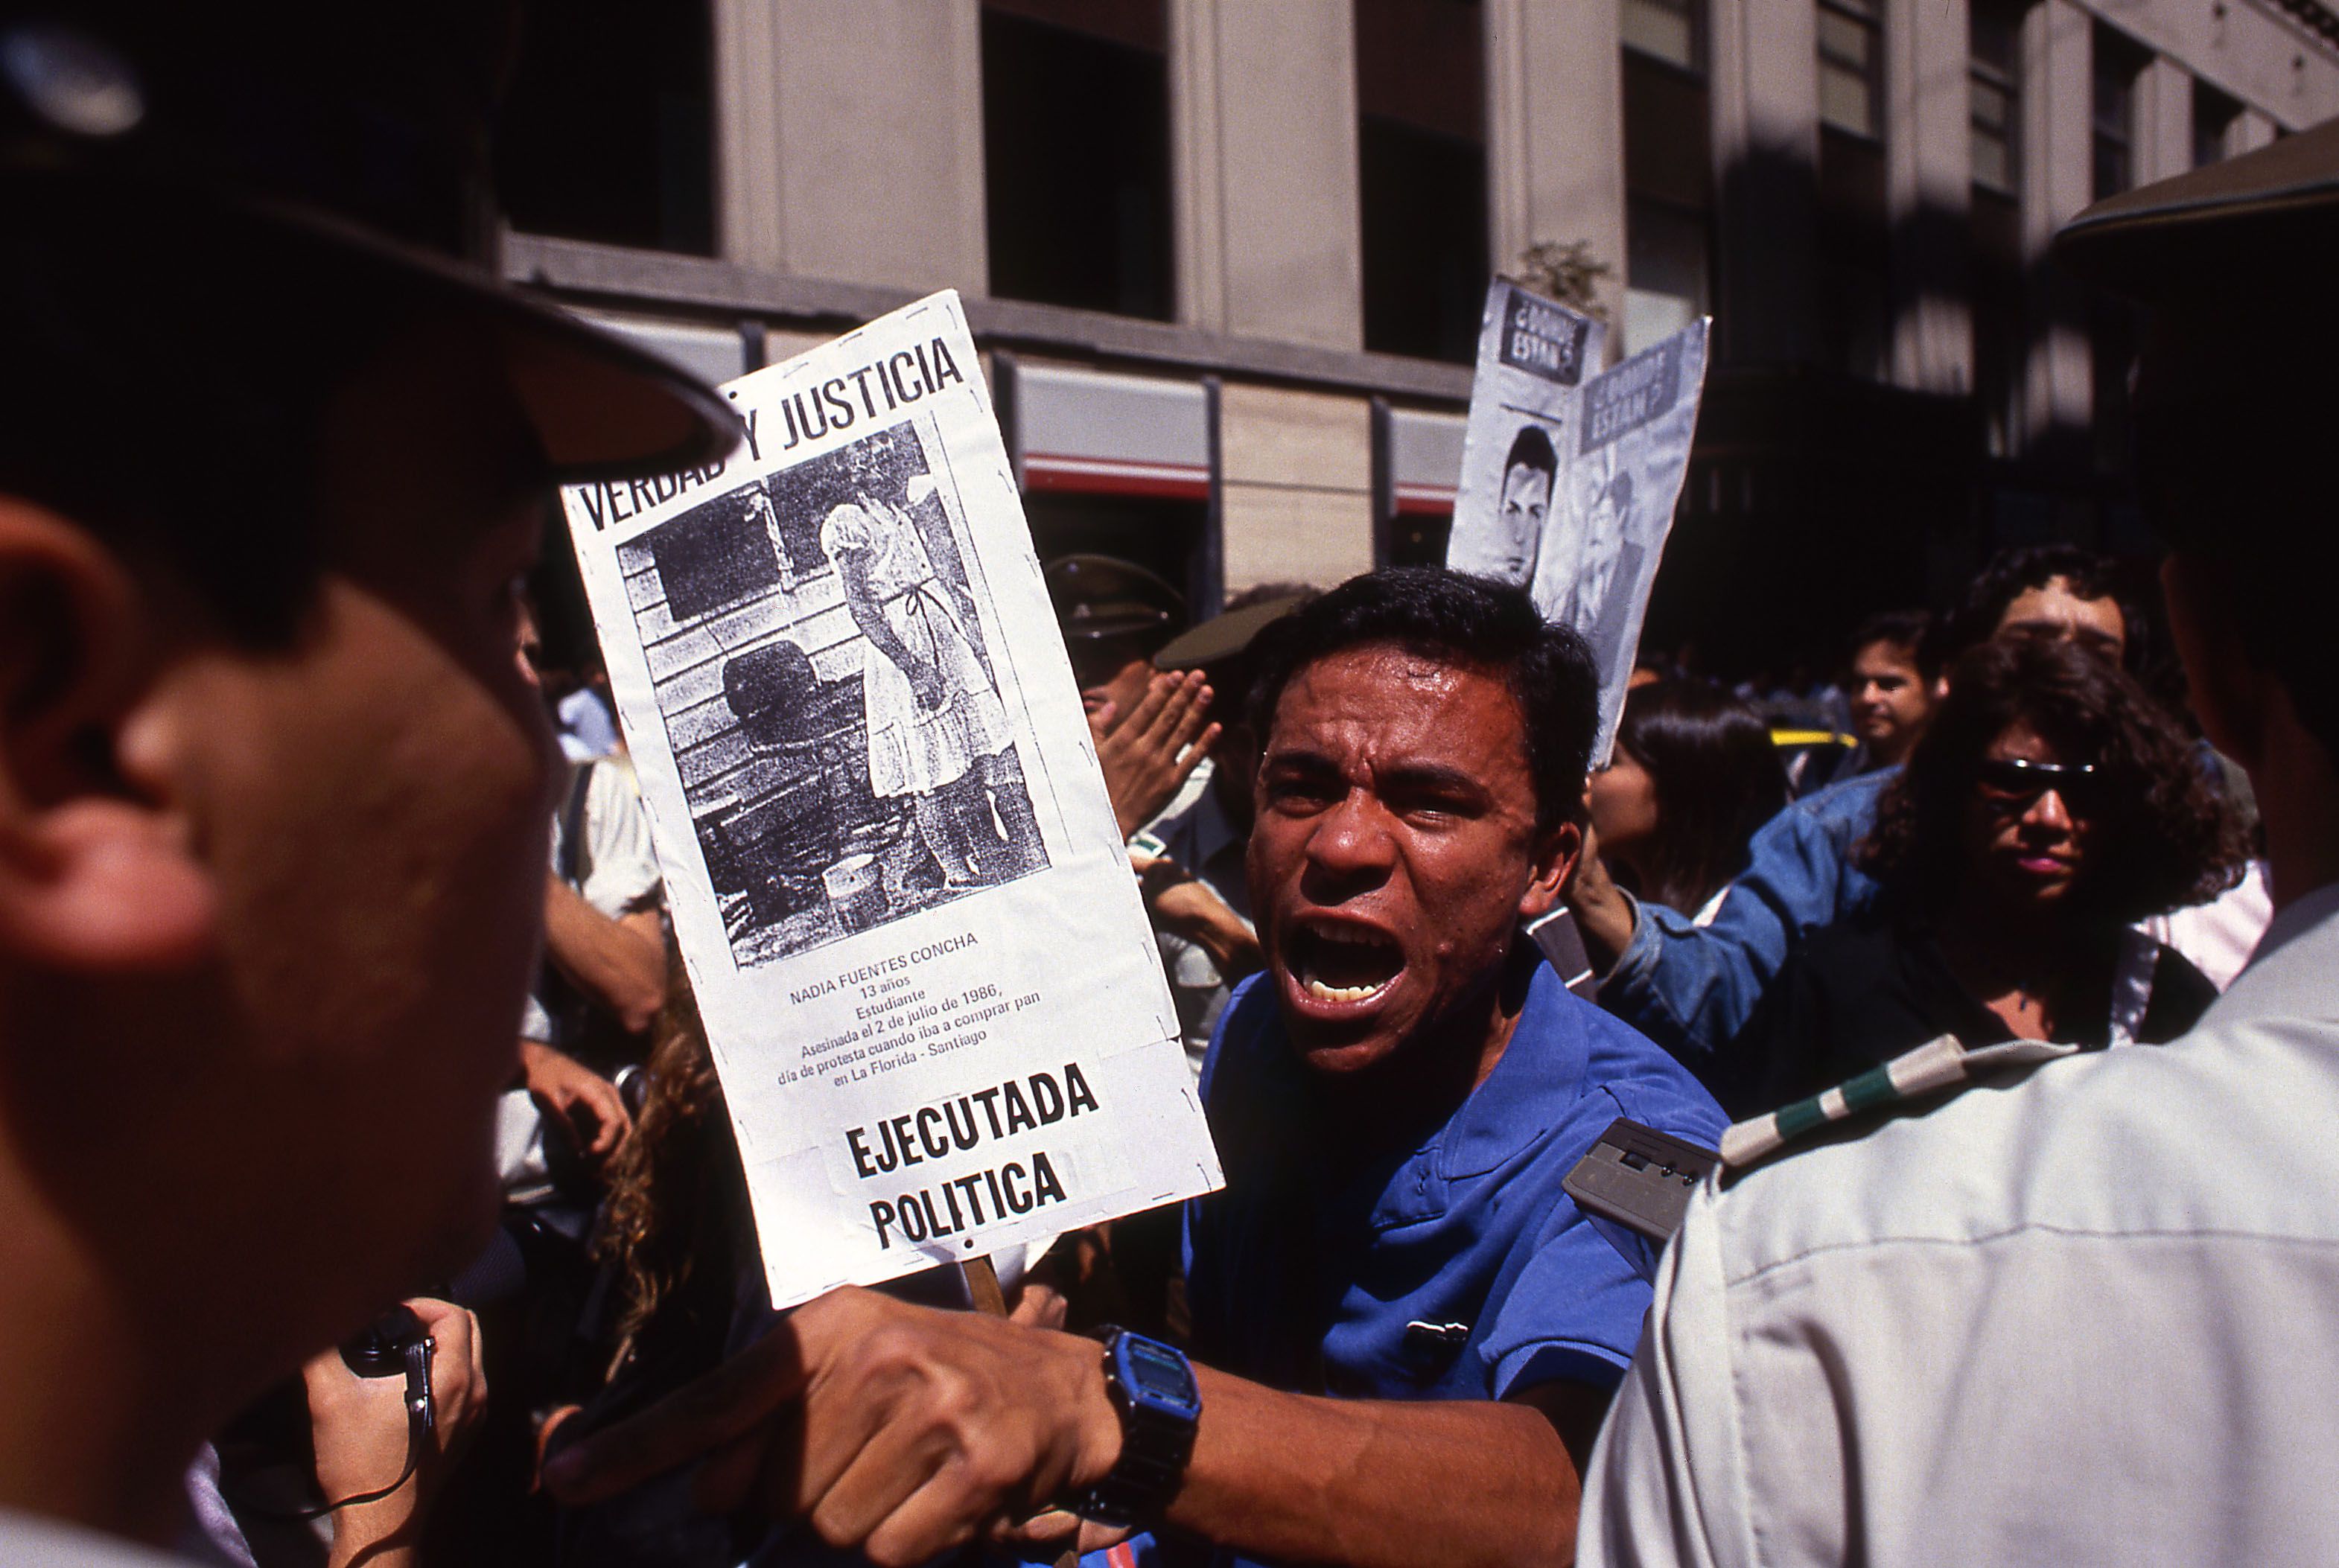 a protester in a blue shirt screams angrily at police during anti-government protest in Chile in 1988